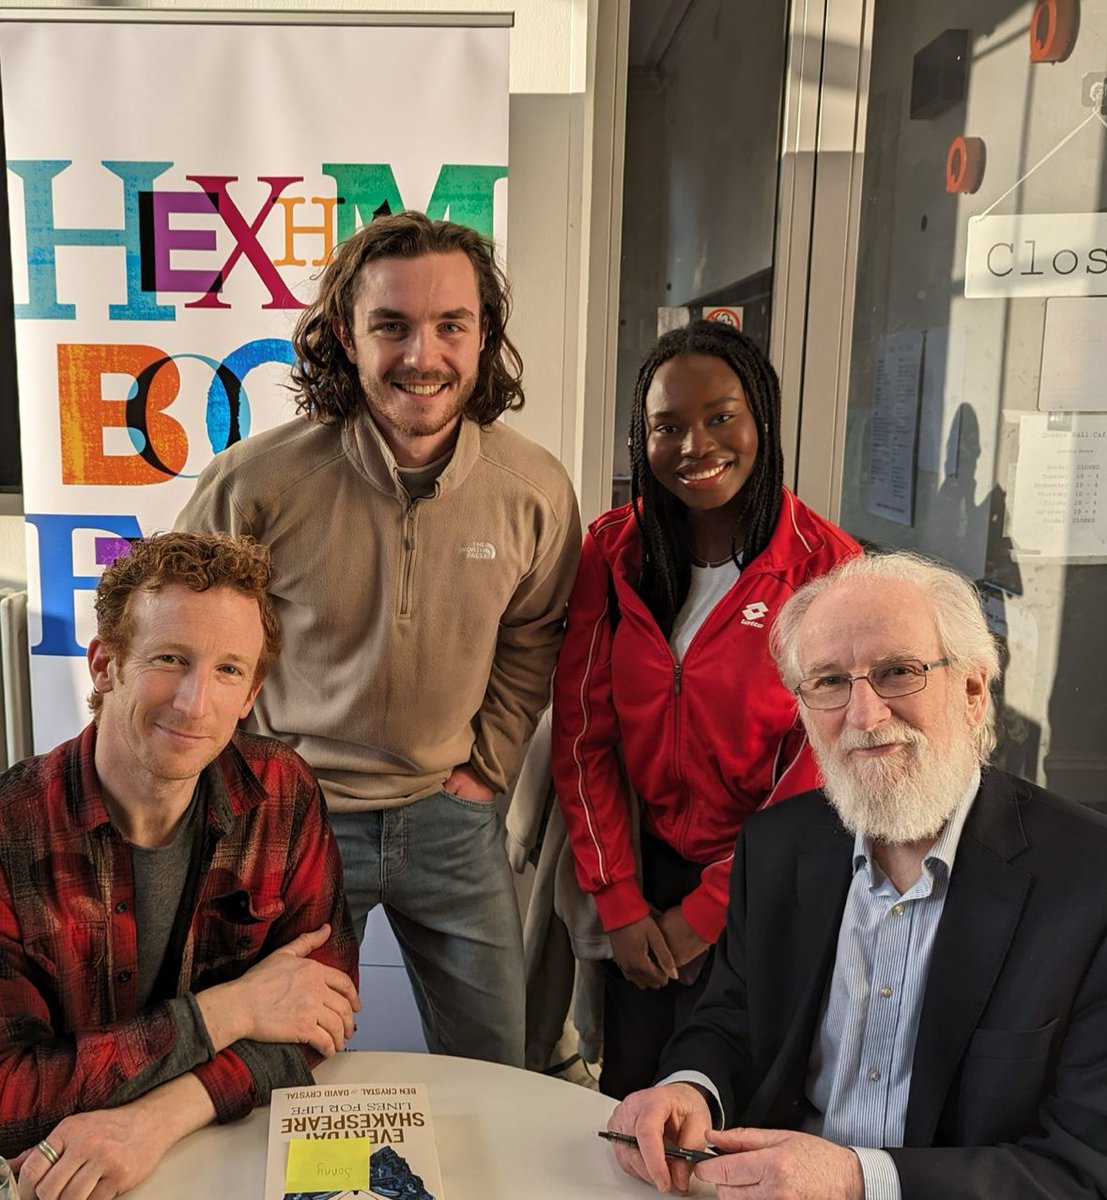 English students Sonny and Favour in Y13 met renowned linguist David Crystal and his son, actor and writer @bencrystal this week @hexhambookfest where they heard them speak about their new book on the language of Shakespeare!